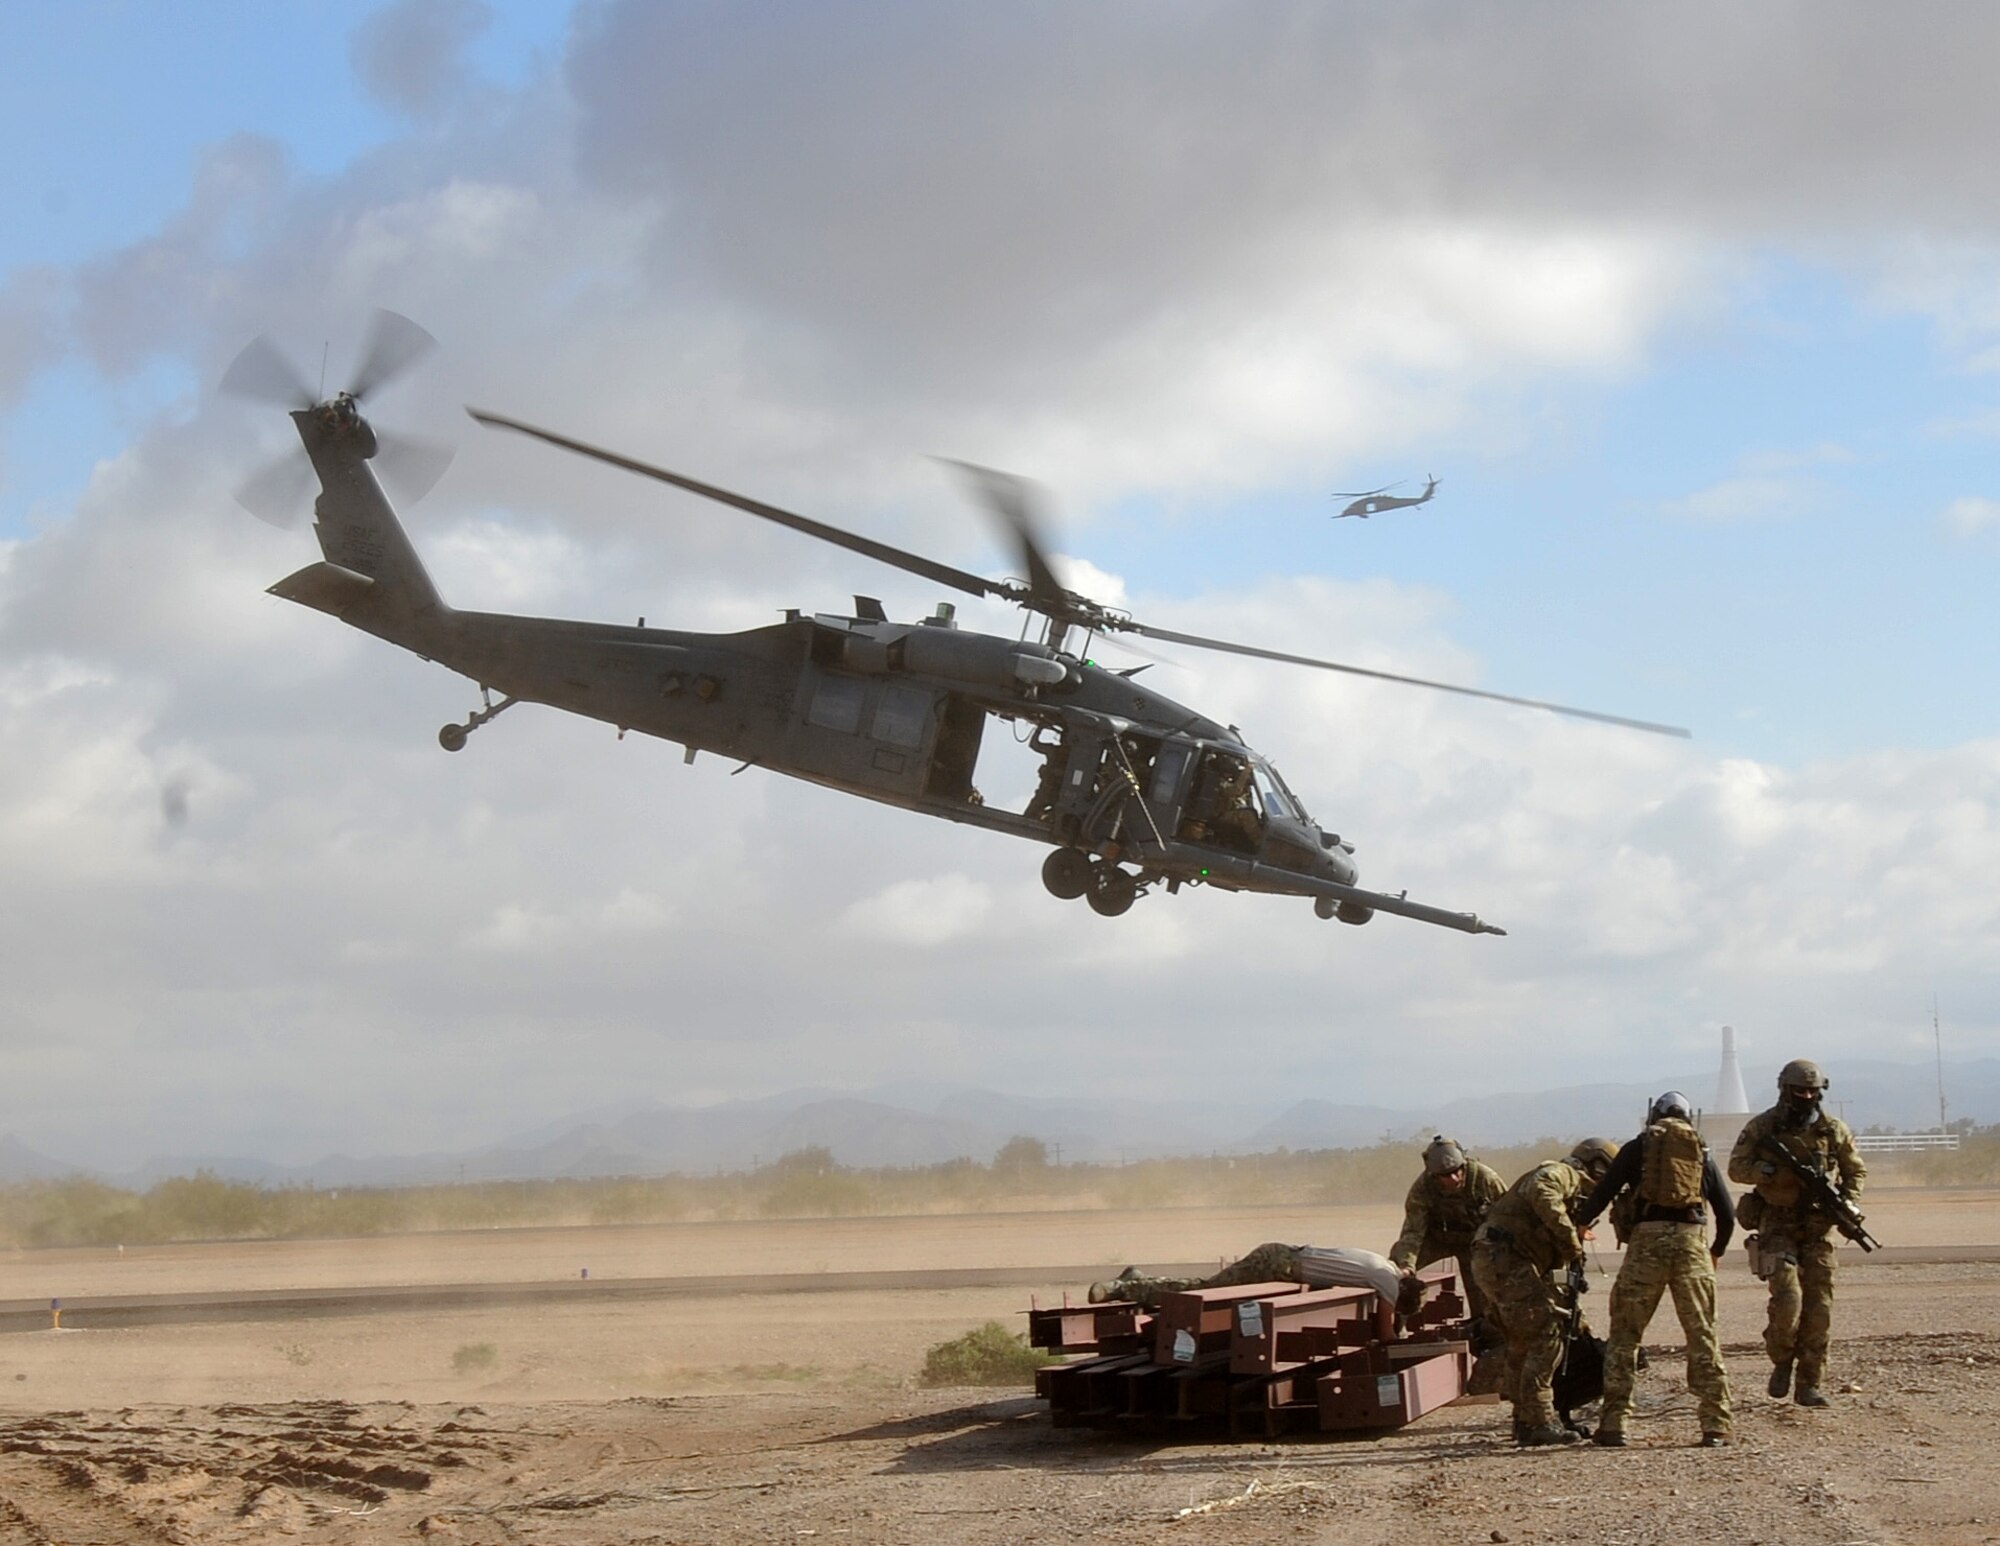 A HH-60G Pave Hawk helicopter with the 943rd Rescue Group takes off after dropping off pararescuemen during a mass causality drill during the Operation Shocker training exercise. The exercise tested the 943rd Rescue Group’s ability to respond to a variety of combat-search-and-rescue scenarios prior to an upcoming deployment. (U.S. Air Force Photo/ Master Sgt. Luke Johnson)